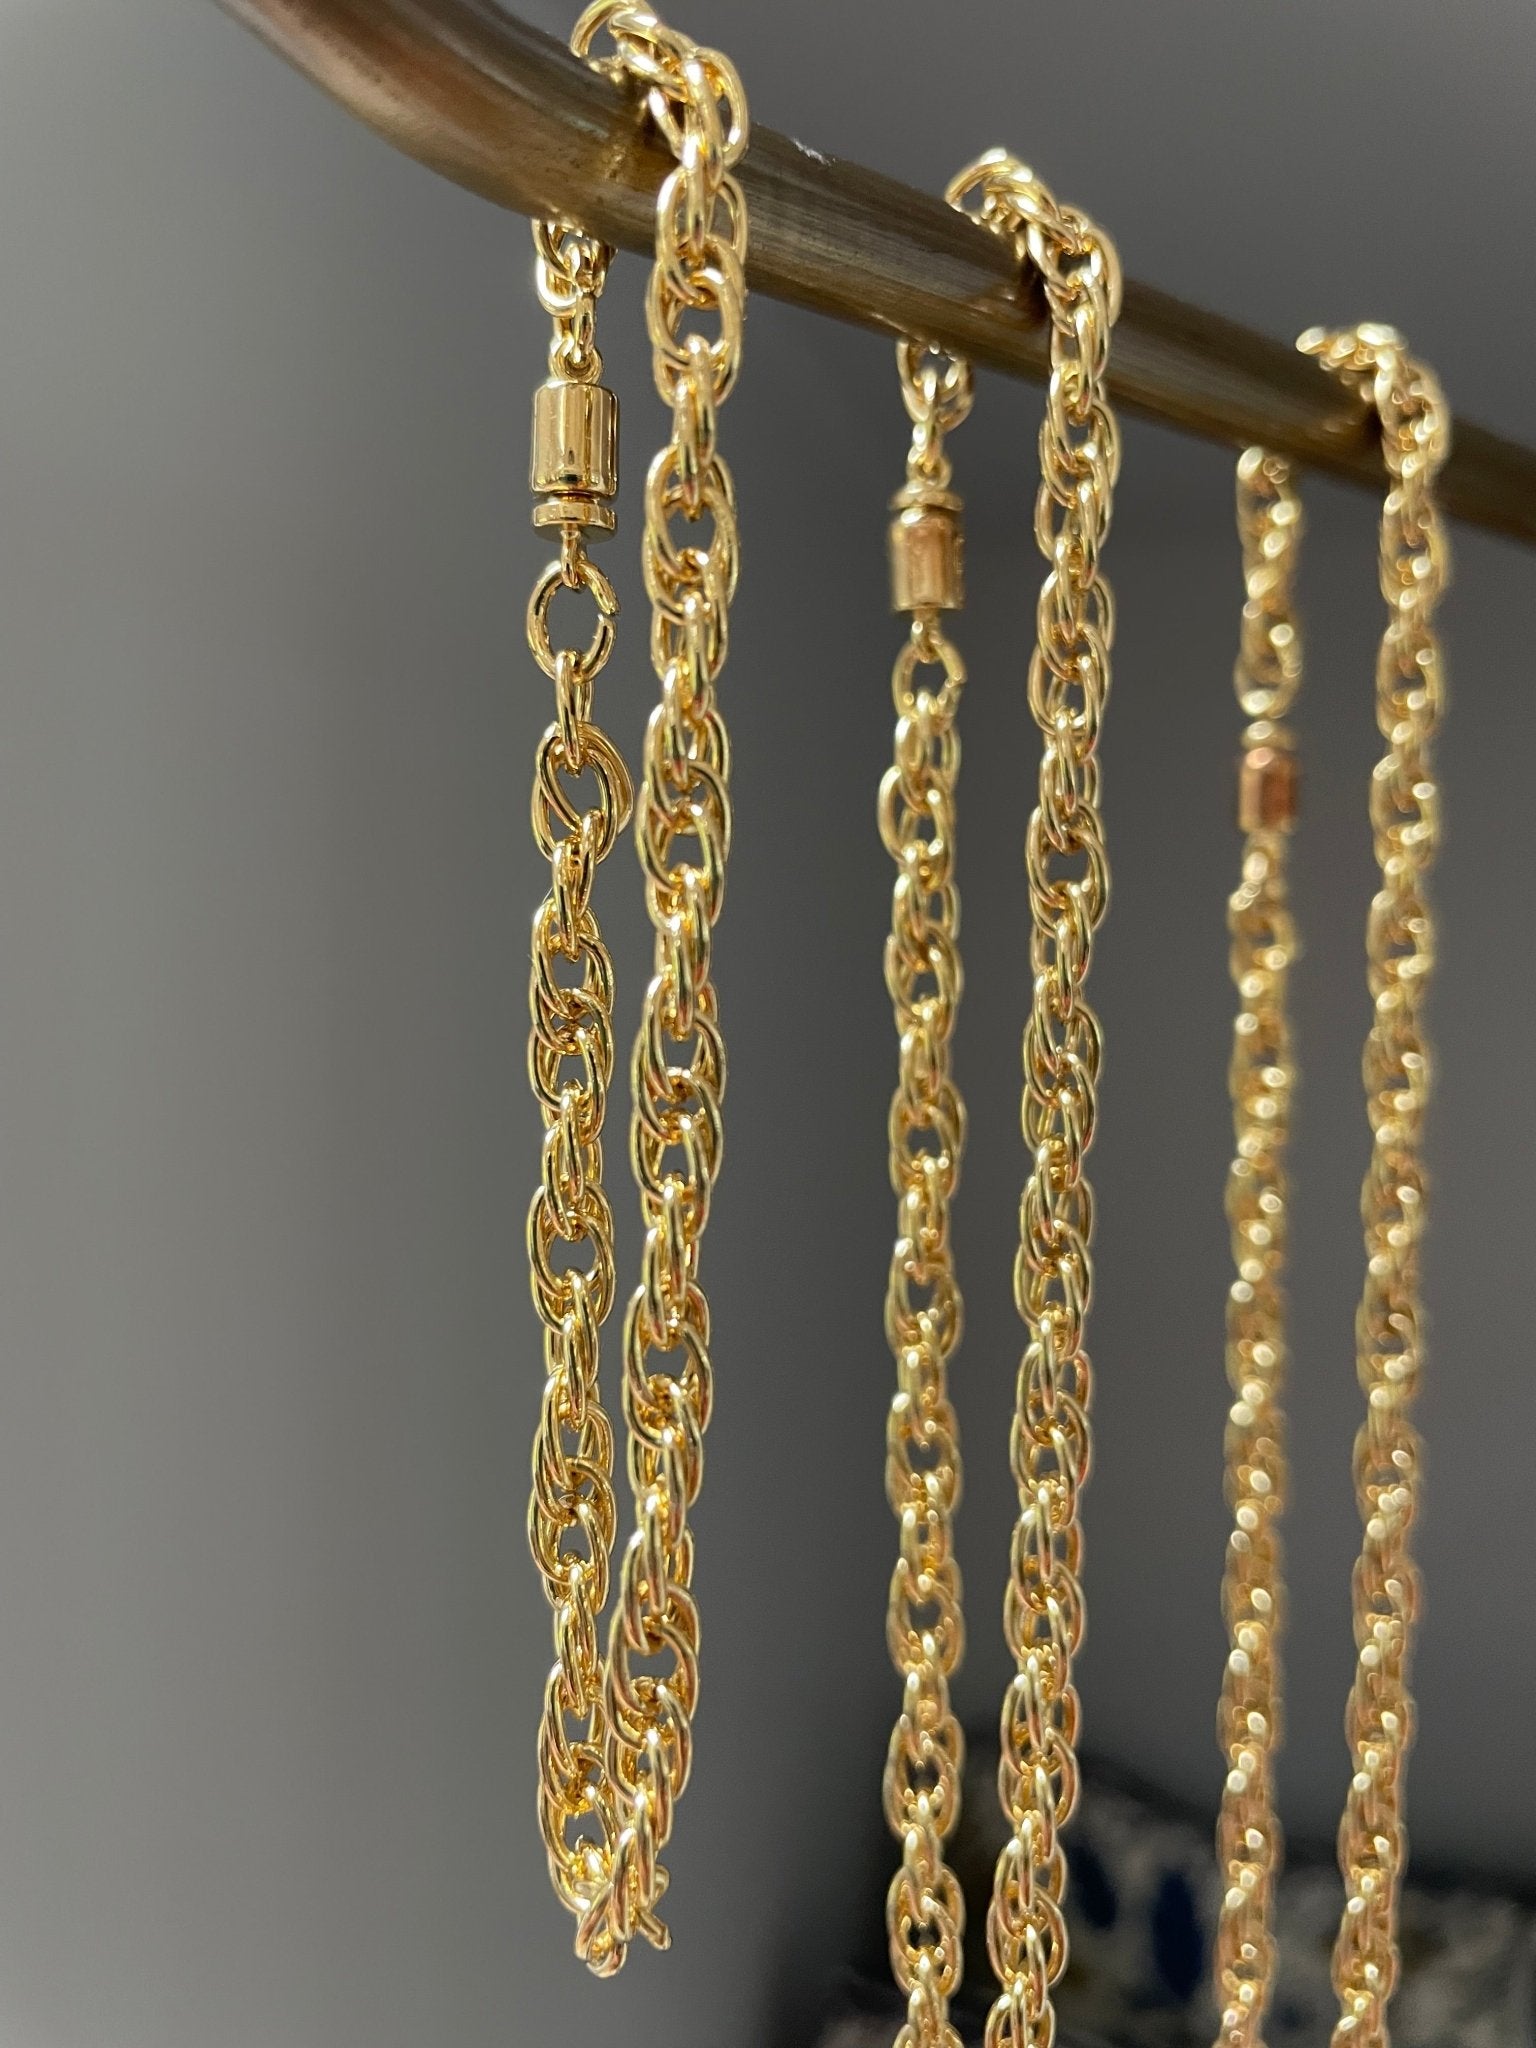 Twisted gold plated chains trio - Natalia Willmott